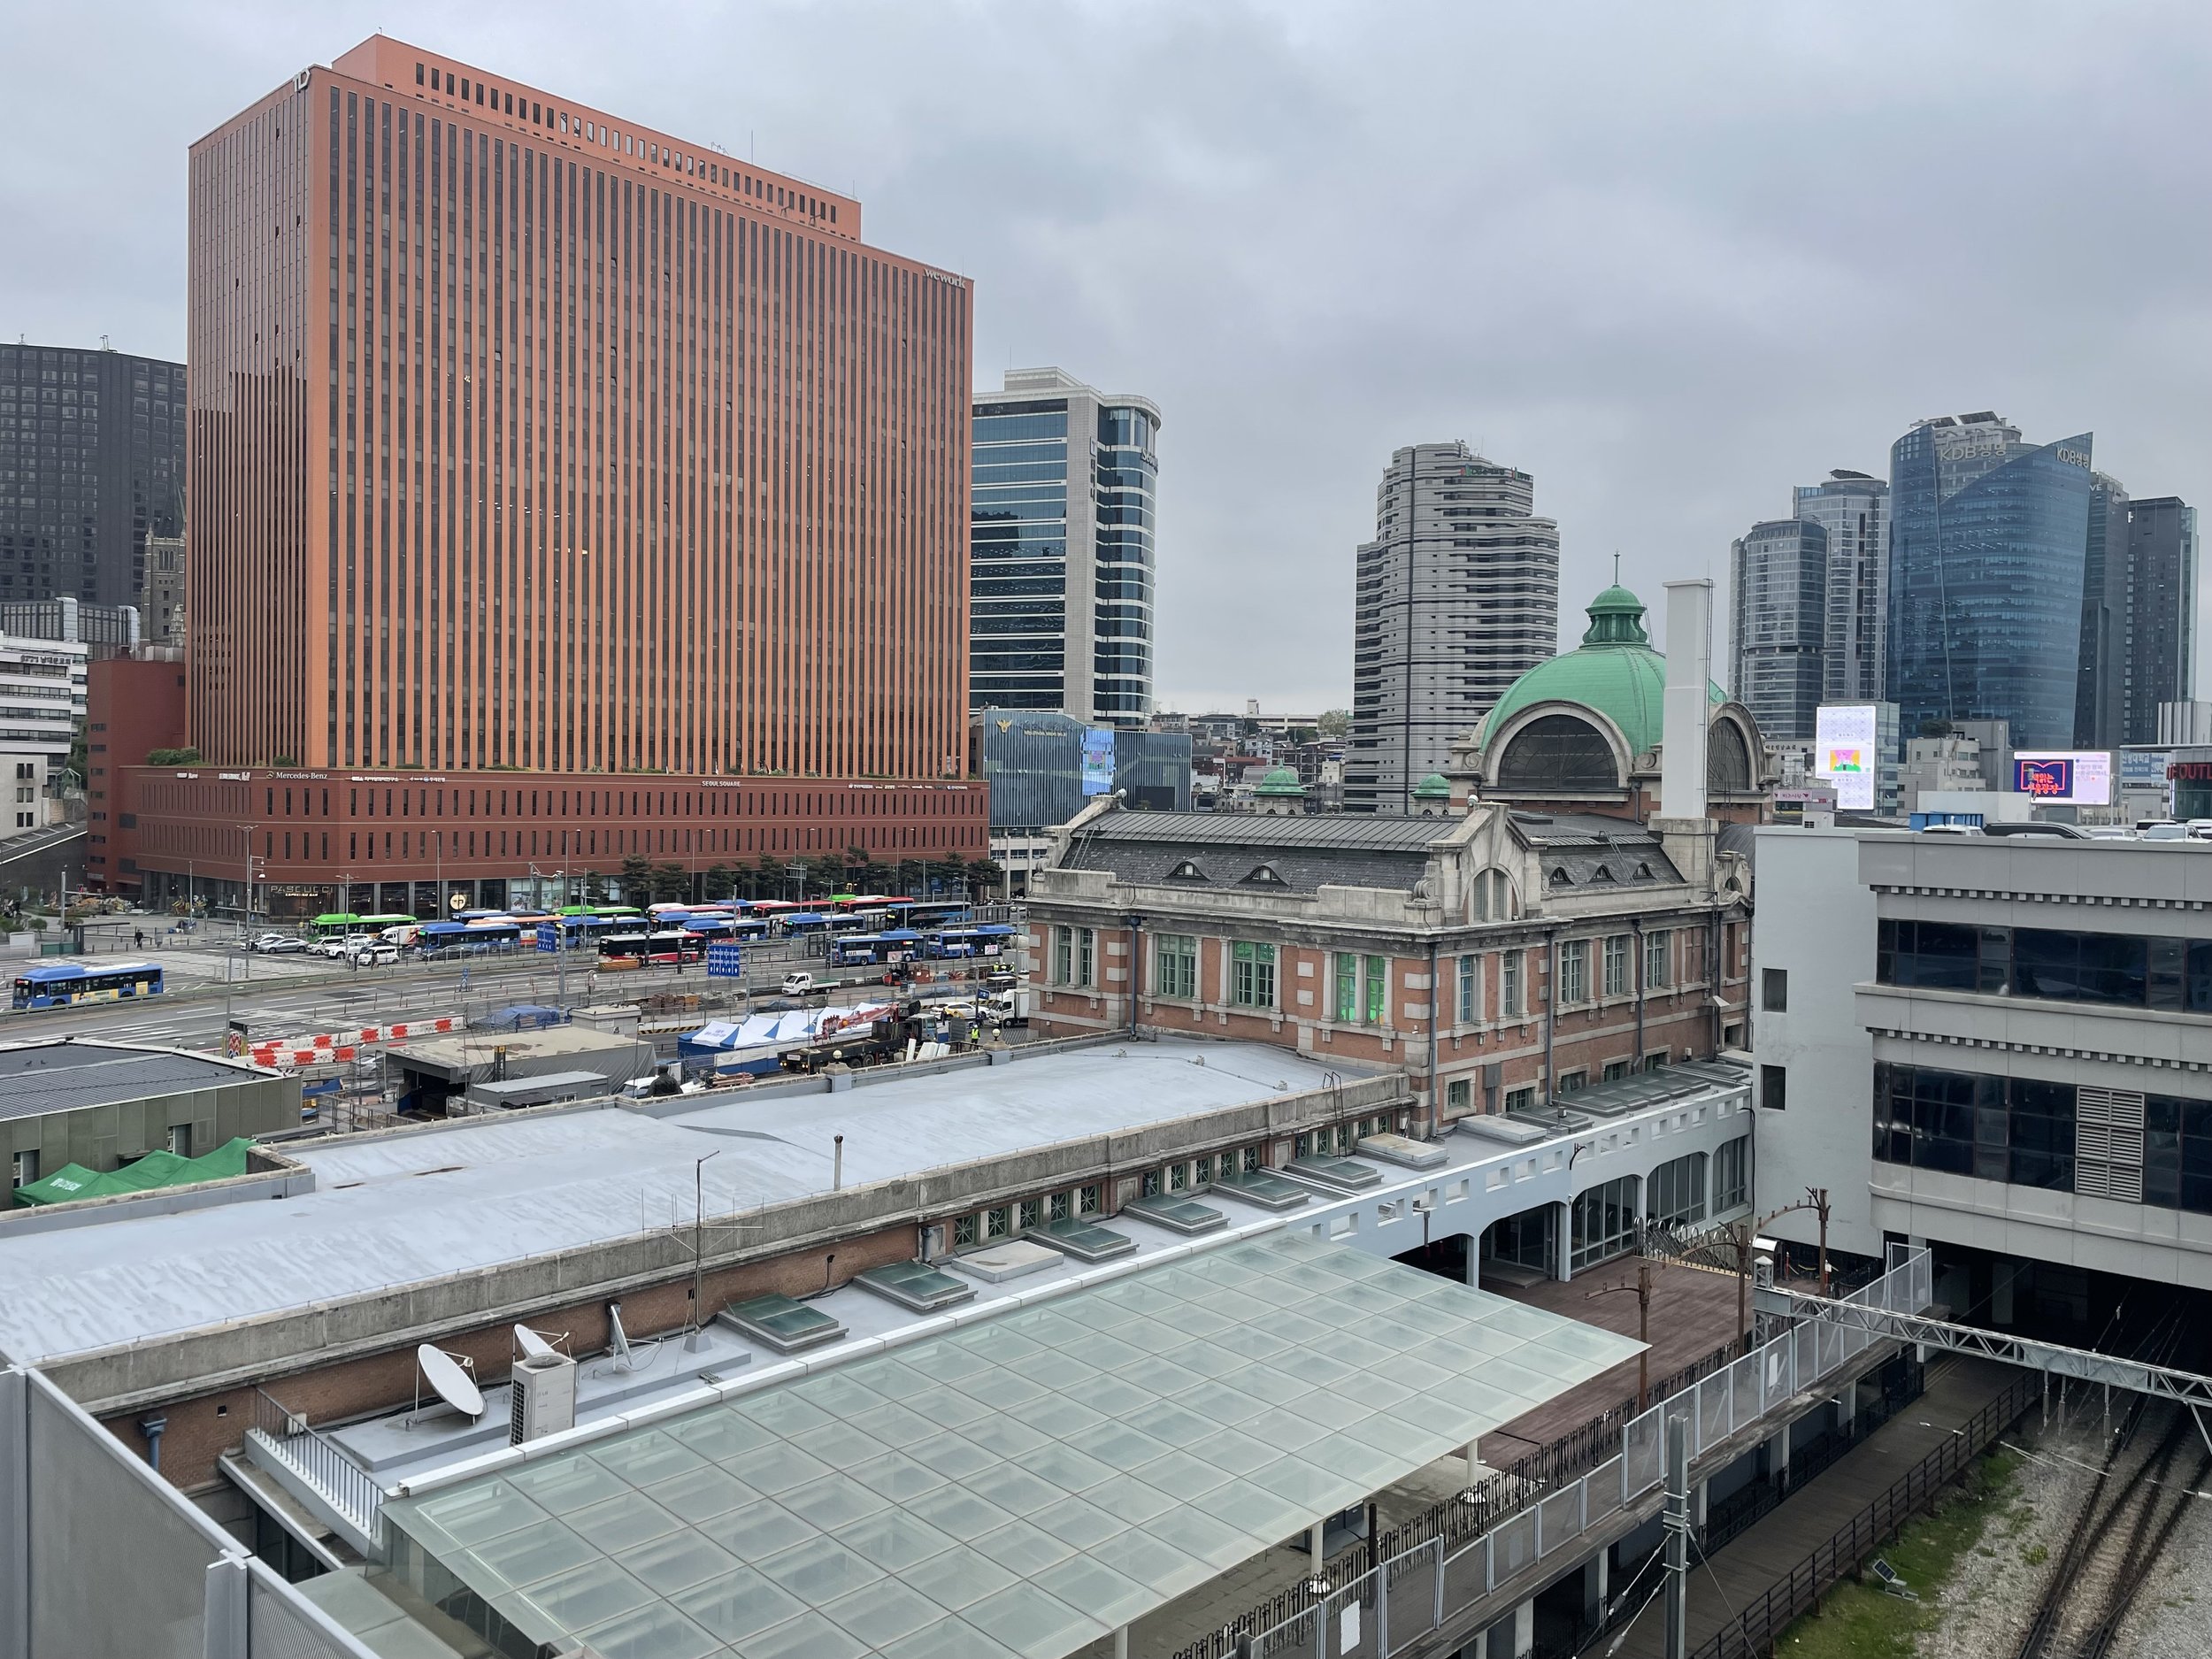 Seoul Station from Seoullo 7017